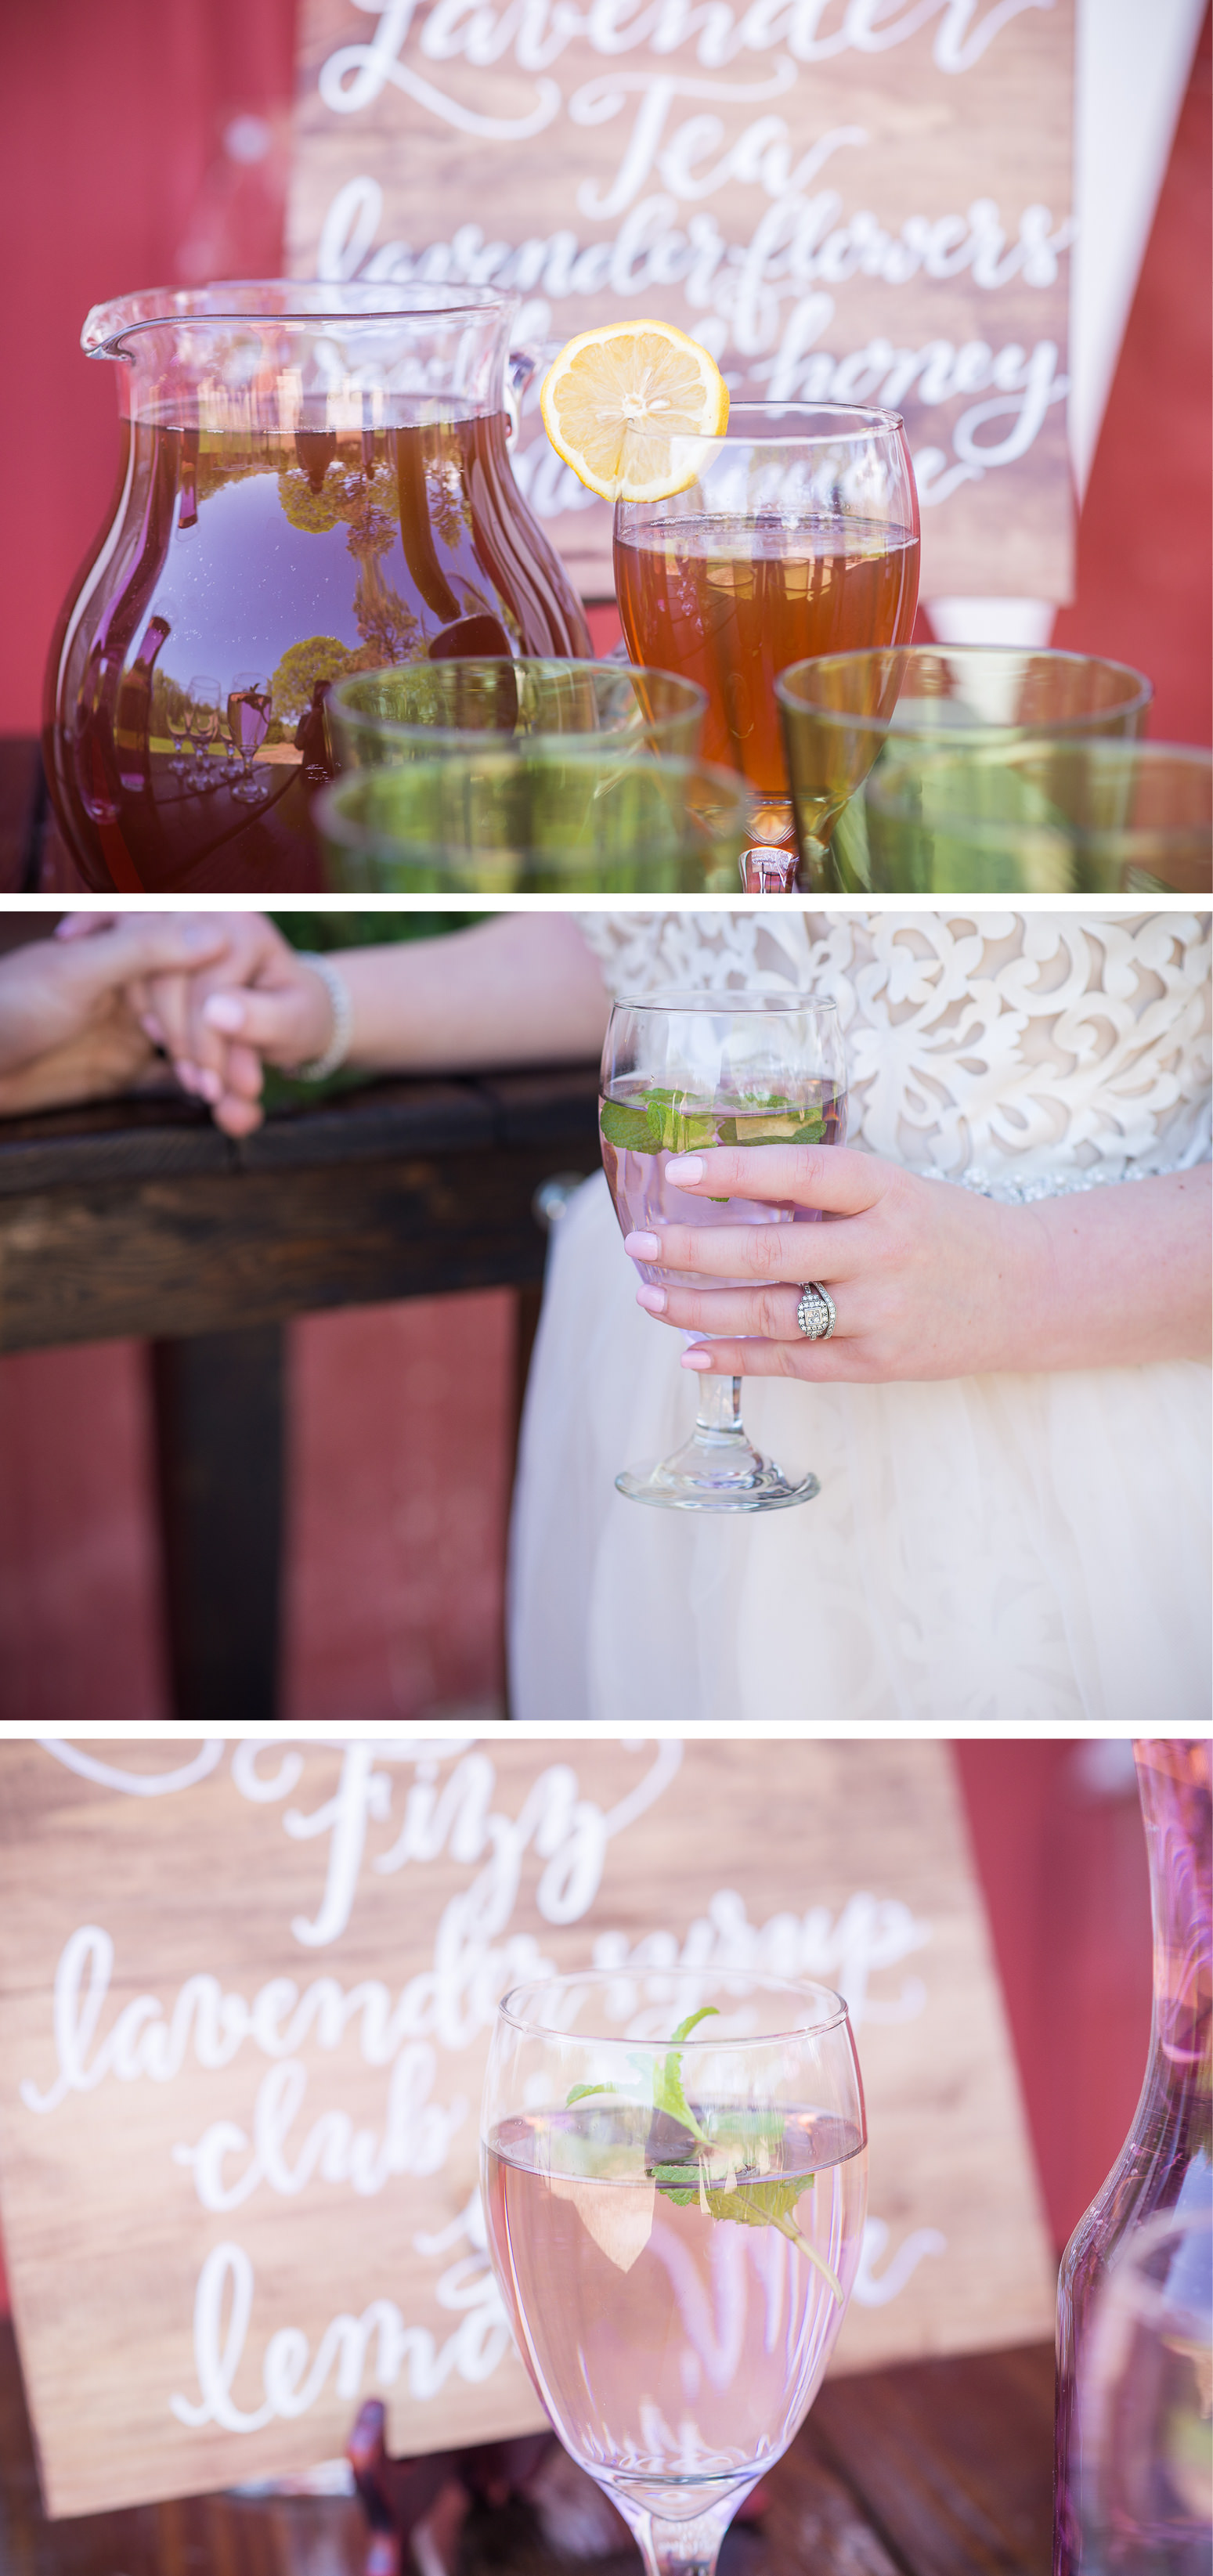 Charlotte-Wedding-Stationer-Lemon-and-Lavender-Styled-Shoot-Magnificent-Moments-Cami-Ann7.jpg